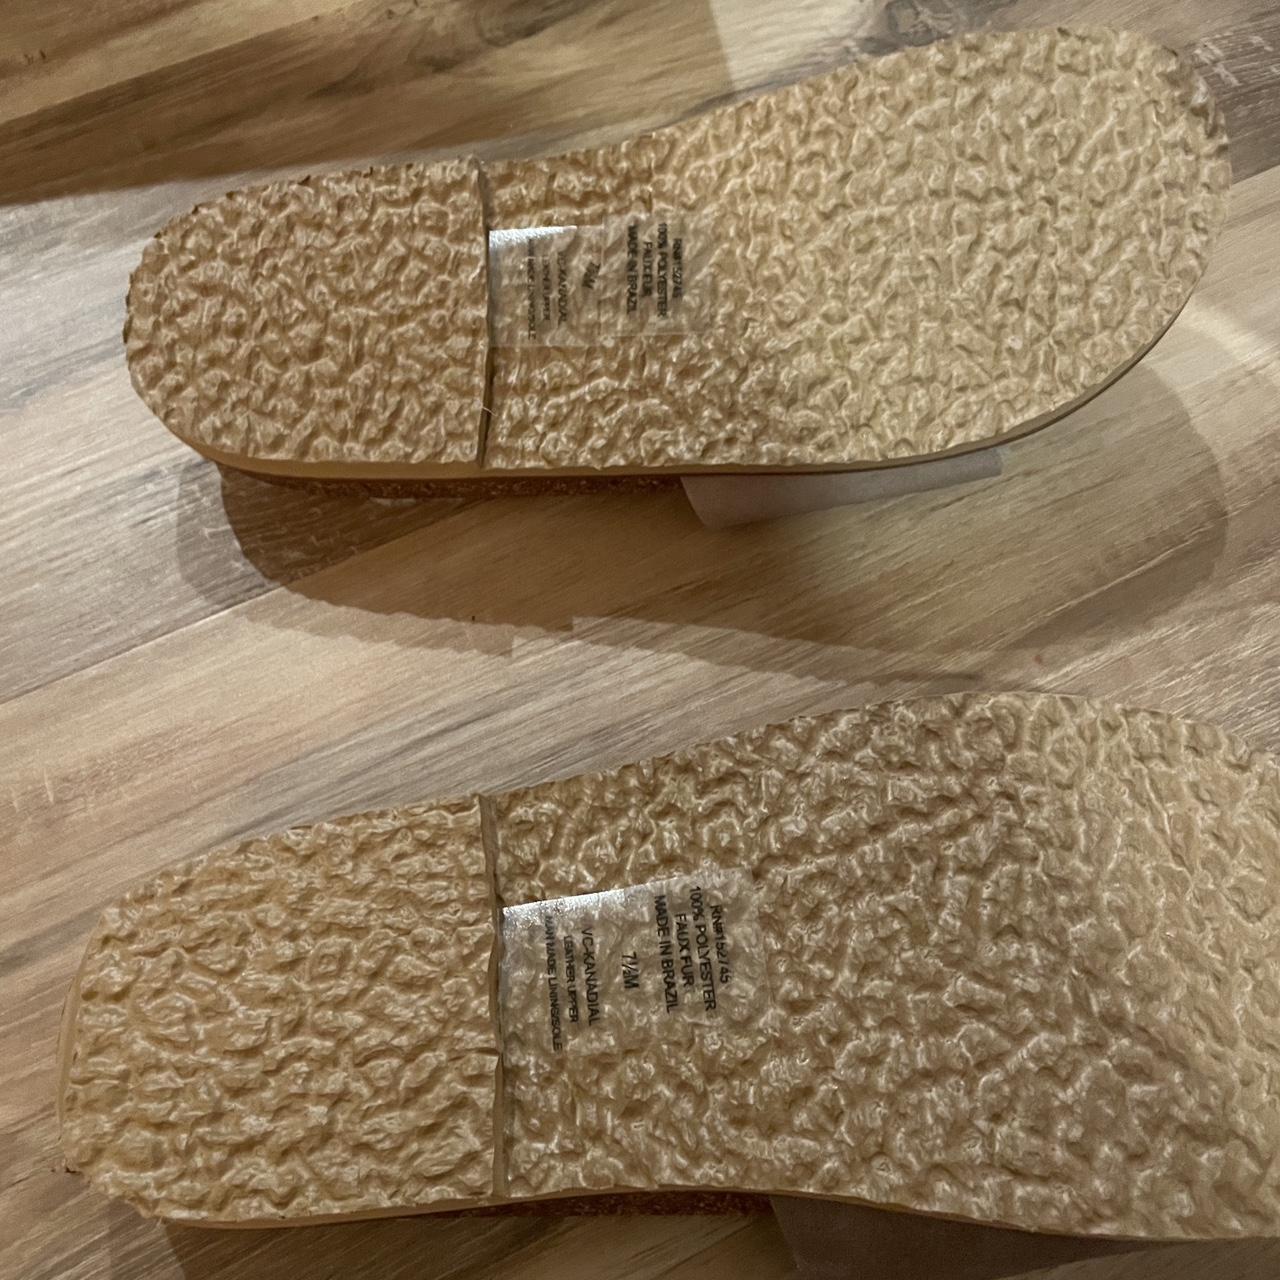 Vince Camuto Women's Tan and Cream Slides (3)